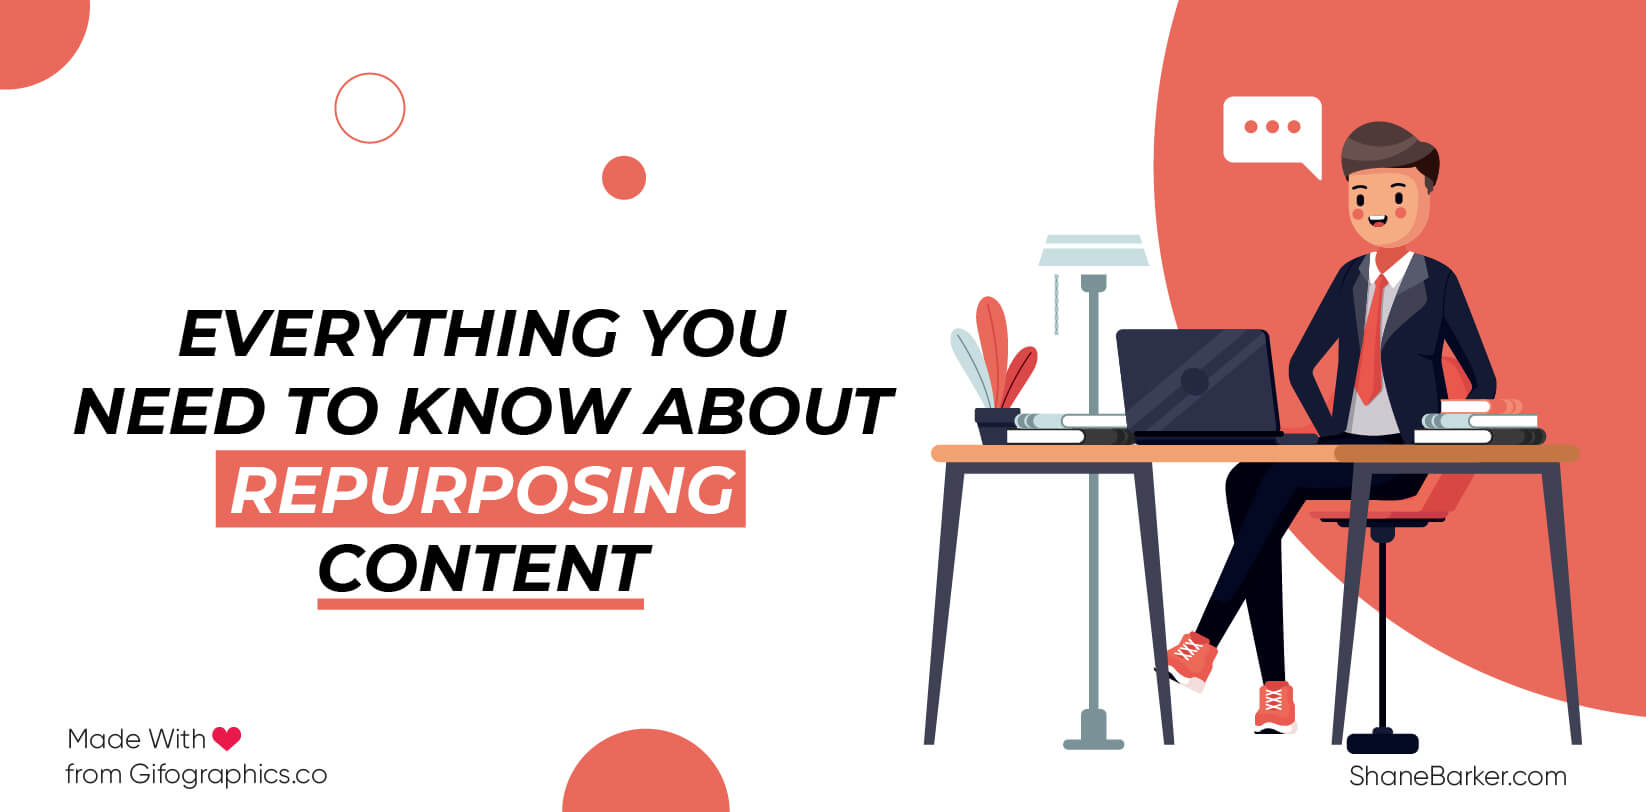 Everything You Need to Know About Repurposing Content